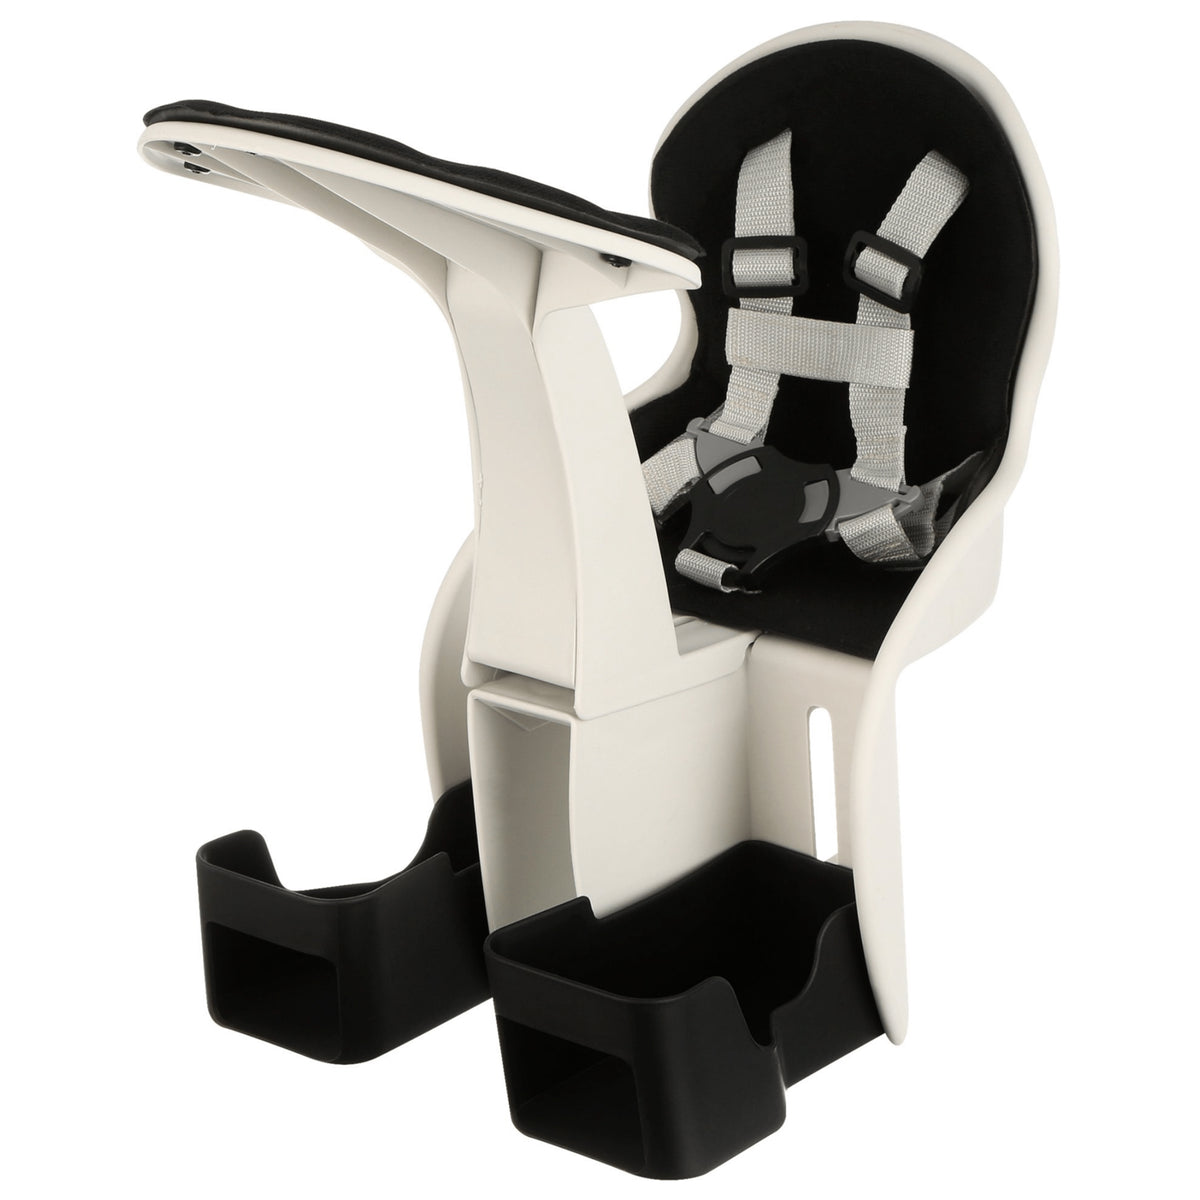 Bike Shop Center Mounted Child Seat | Child Bike Seat for Kids Ages 8 Months - 3 Years